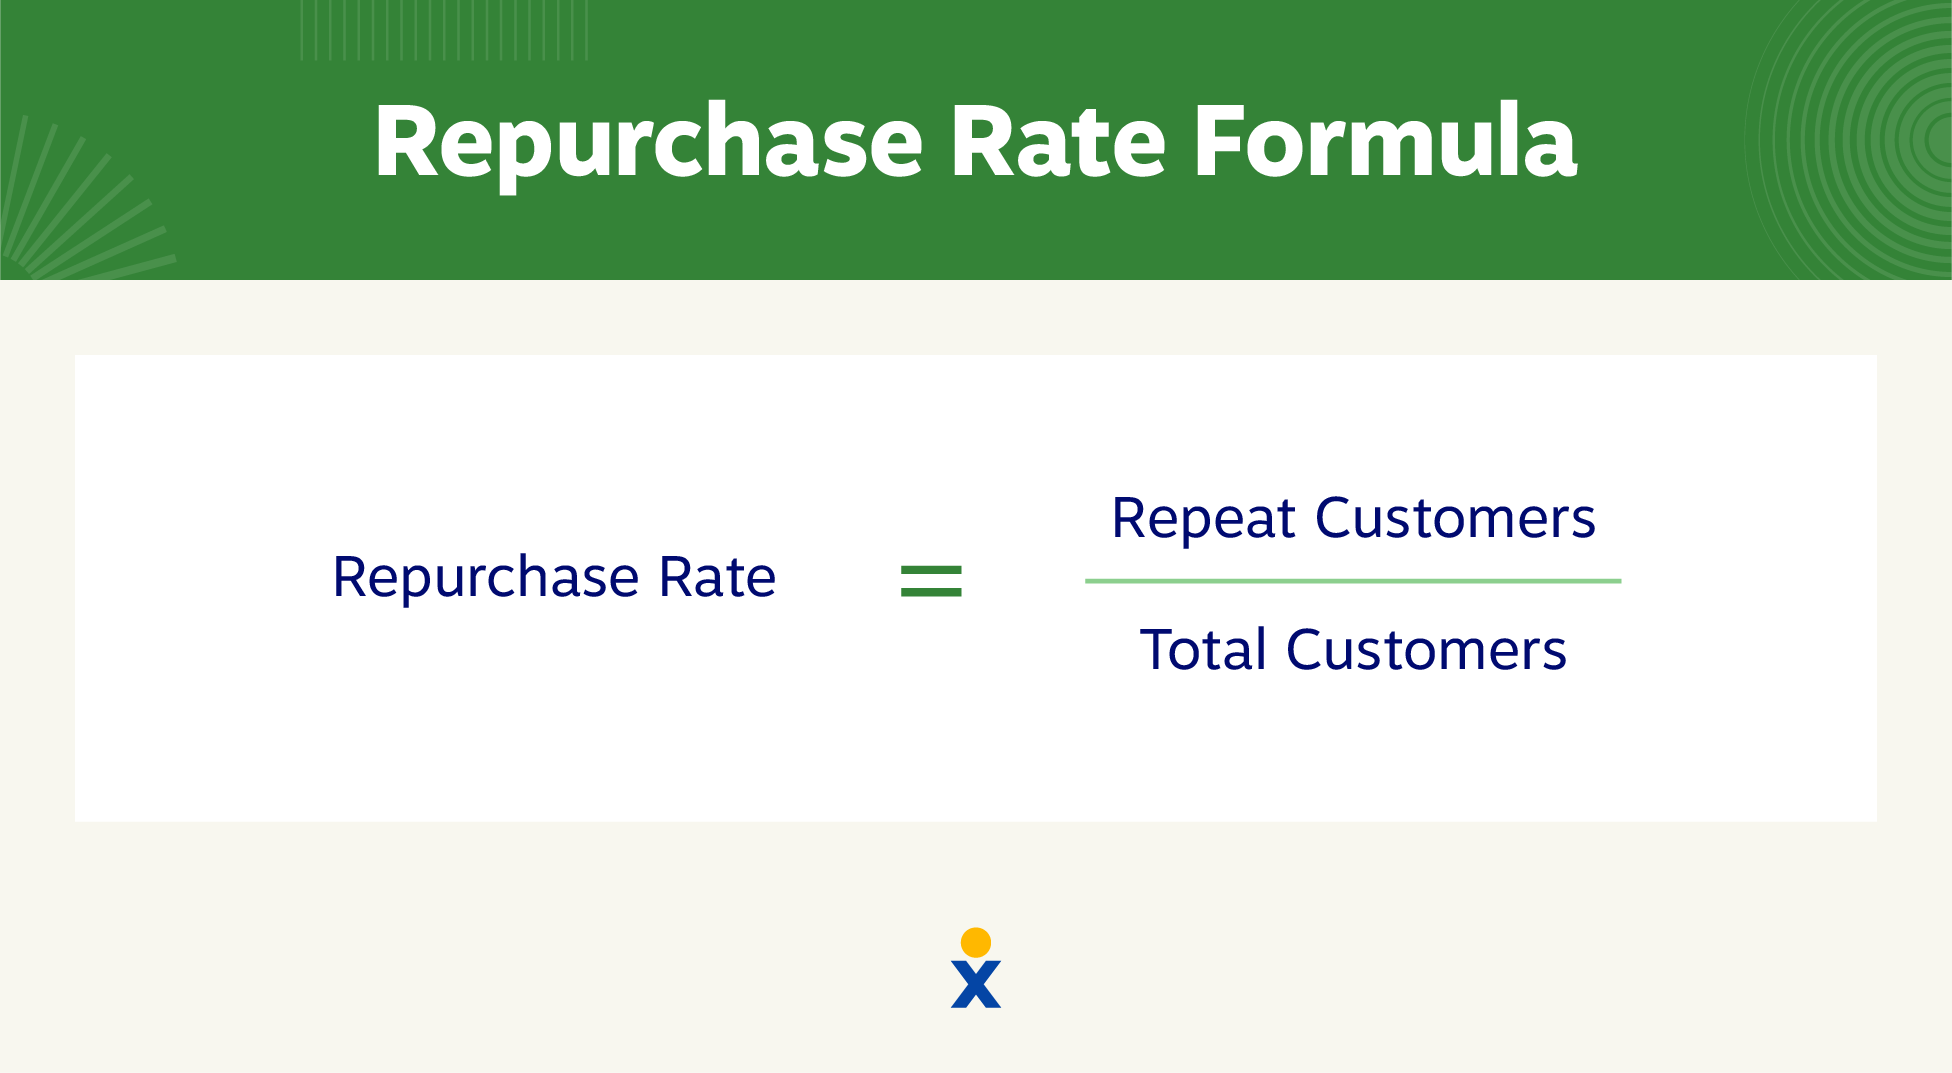 Repurchase Rate formula